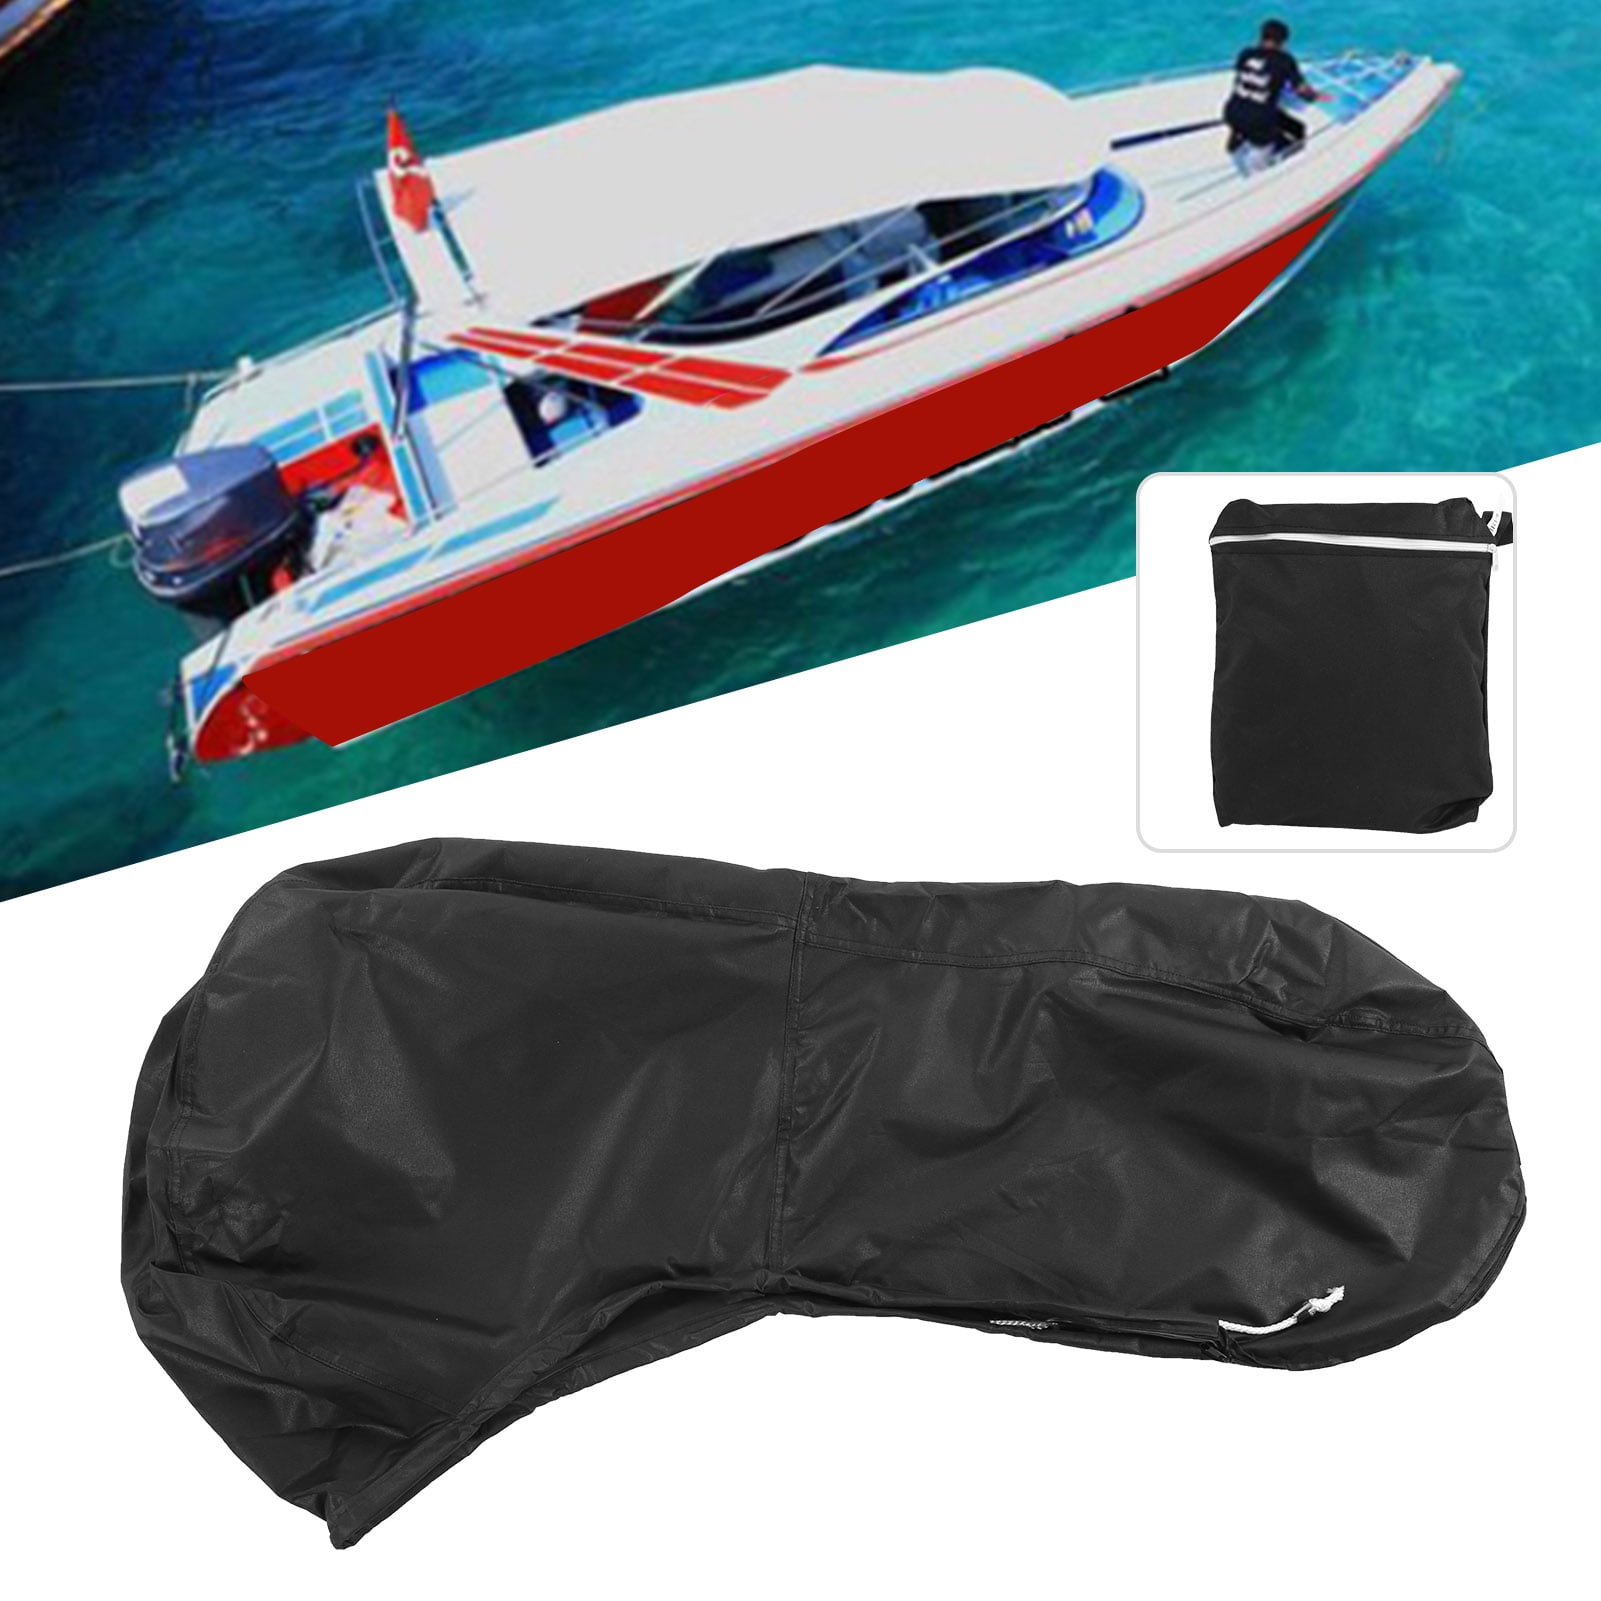 Details about   Boat Yacht Outboard Motor Rainproof Protection Sun Cover Marine Accs Cover Case 